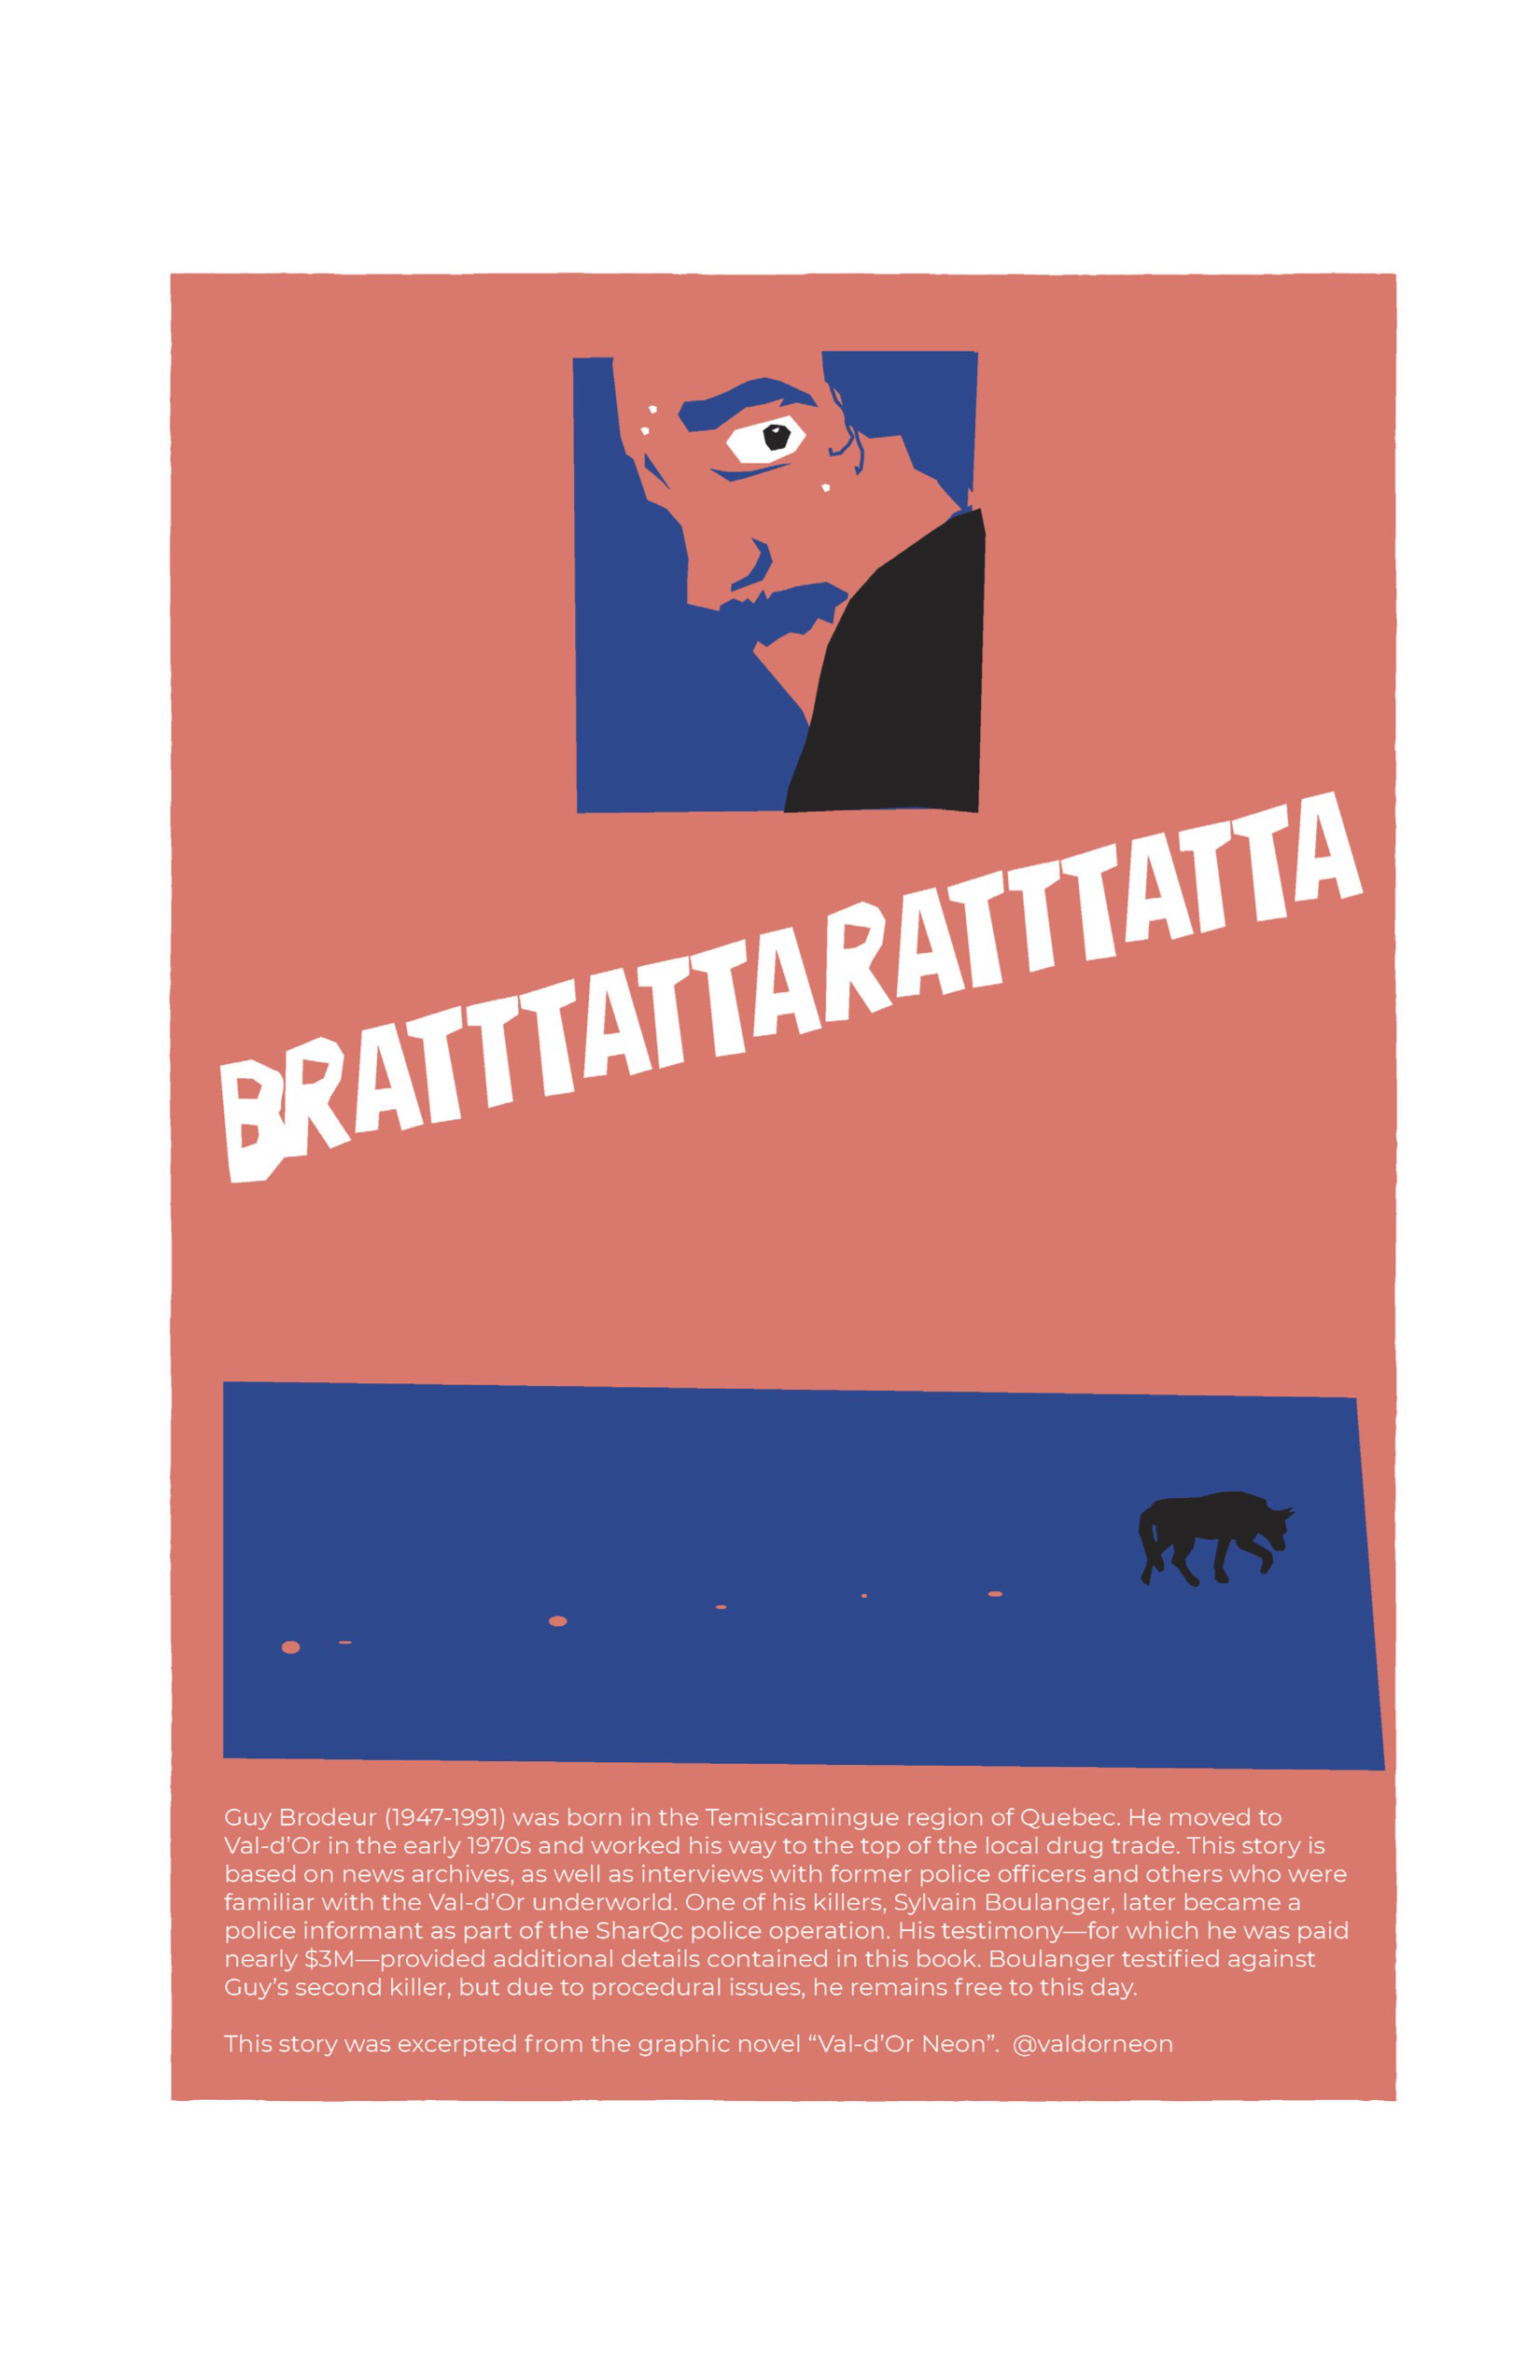 Once again a gutter-less page, the background is peachy orange. An inset panel at the top of the page shows a close-up of Guy’s face looking over his shoulder from the ground. He looks nervous and grim. 
Below this panel, “BRATTTATTARATTTATTA” stretches across the width of the page diagonally in large white letters. 
In another inset panel below that, with a dark blue background, Guy’s dog, a black silhouette, walks off in the distance, leaving behind a trail of blood. 

At the bottom of the page, written in a thin white font different from the rest of the lettering, reads the text, “Guy Brodeur (1947-1991) was born in the Temiscamingue region of Quebec. He moved to Val-d’Or in the early 1970s and worked his way to the top of the local drug trader. This story is based on news archives, as well as interviews with former police officers and others who were familiar with the Val-d’Or underworld. One of his killers, Sylvain Boulanger, later became a police informant as part of the SharQc police operation. His testimony—for which he was paid nearly $3M—provided additional details contained in this book. Boulanger testified against Guy’s second killer, but due to procedural issues, he remains free to this day. This story was excerpted from the graphic novel ‘Val-d’Or Neon.’ @valdorneon.”